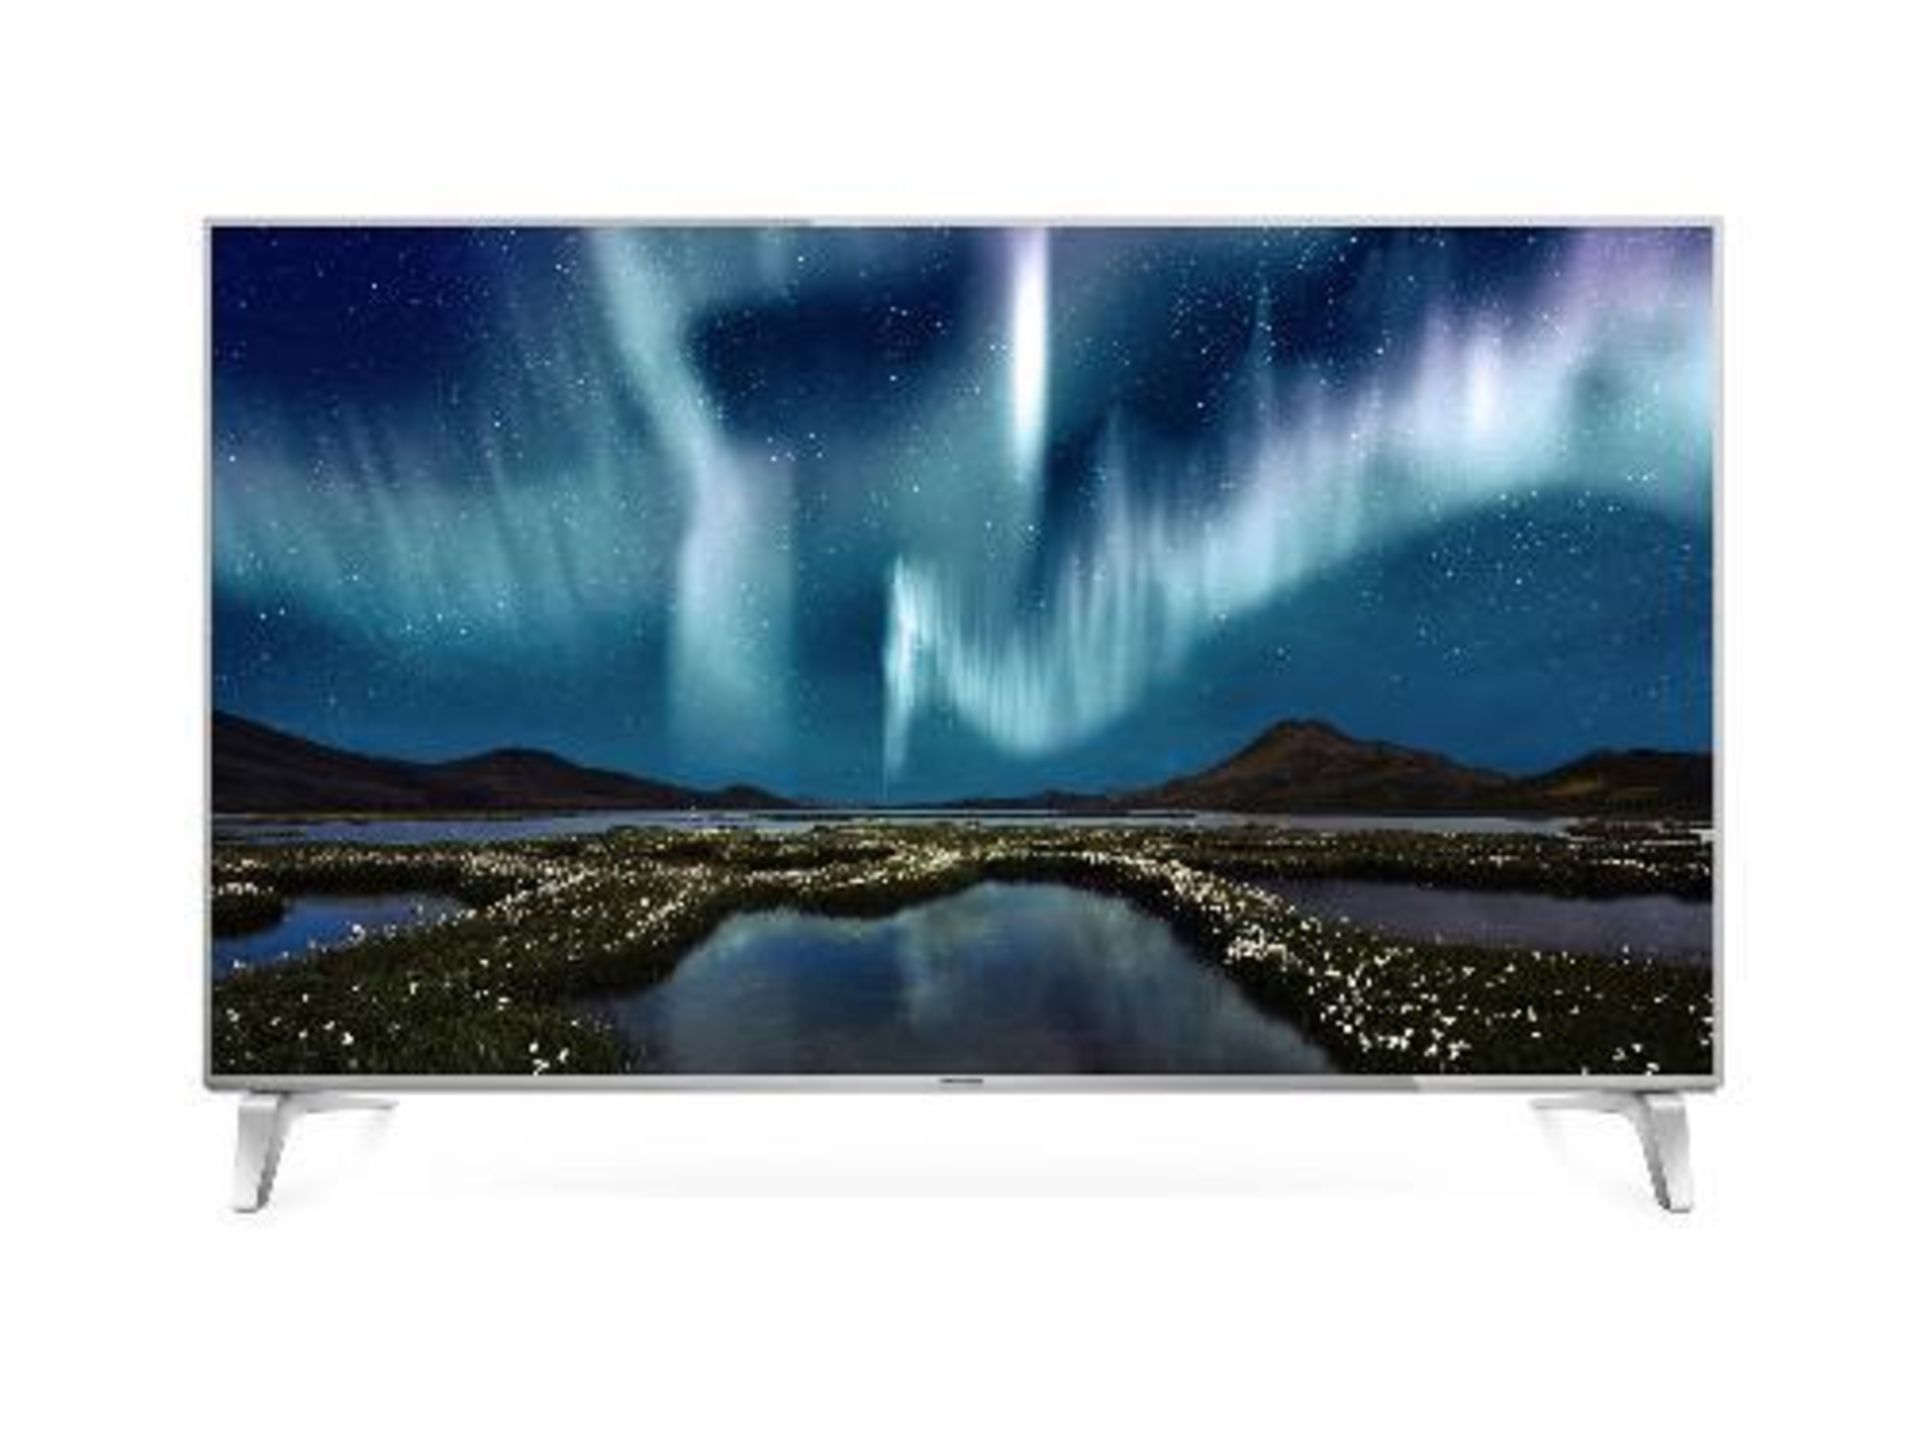 1 65" PANASONIC TX-65DX750 4K ULTRA HD 3D SMART LED HDR TV WITH REMOTE RRP Â£1299 (WORKING, NO